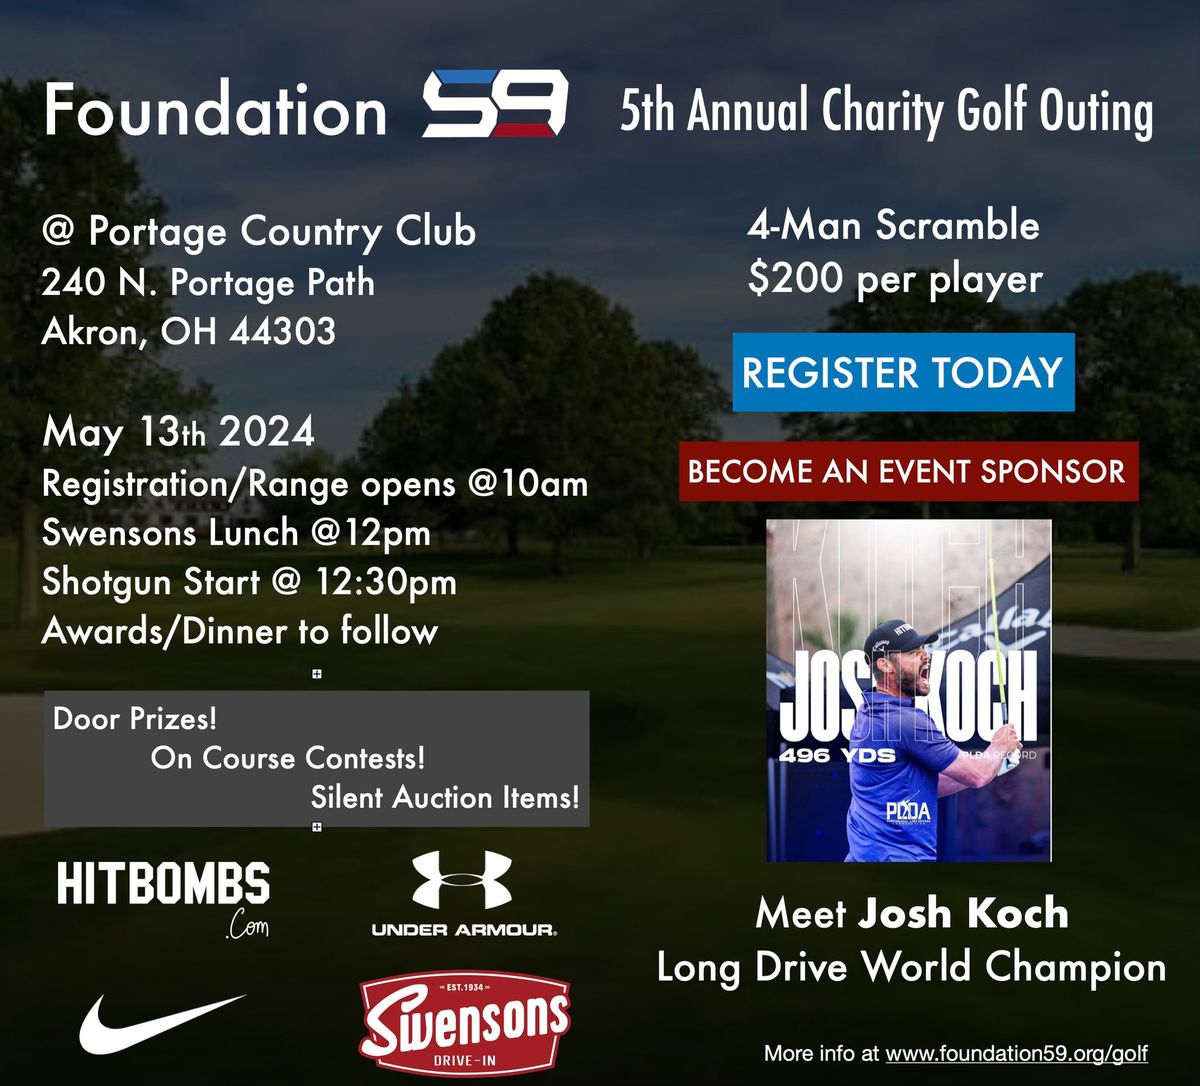 Foundation 59 Charity Golf Outing presented by Barbera Home Improvement